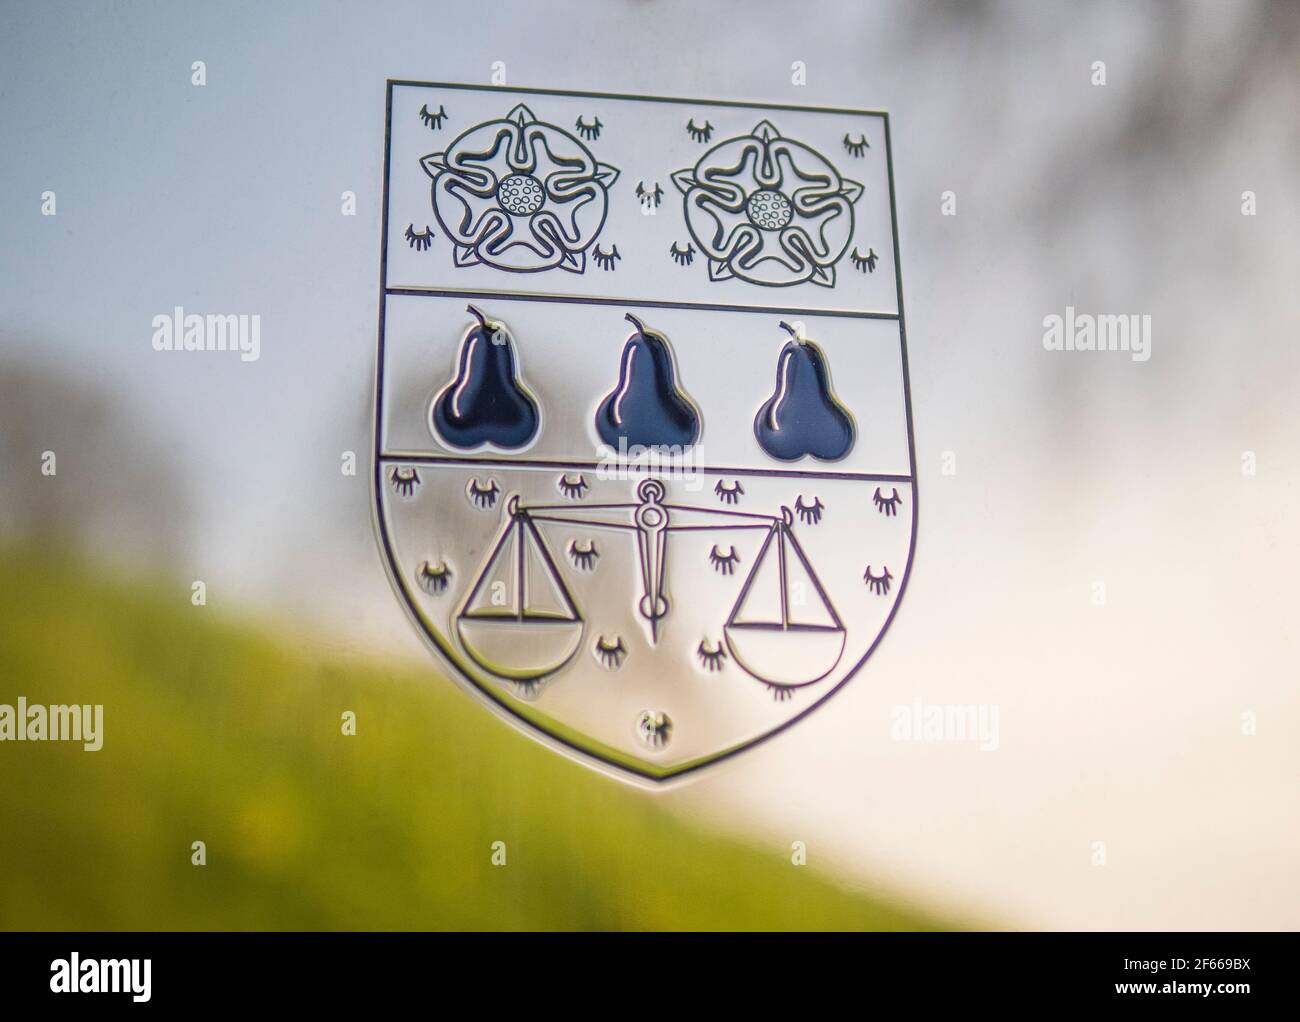 Reflection of Castle Mound, in Nuffield Collage Name Plaque, Oxford University, Oxford, Oxfordshire, England, UK, GB. Stock Photo